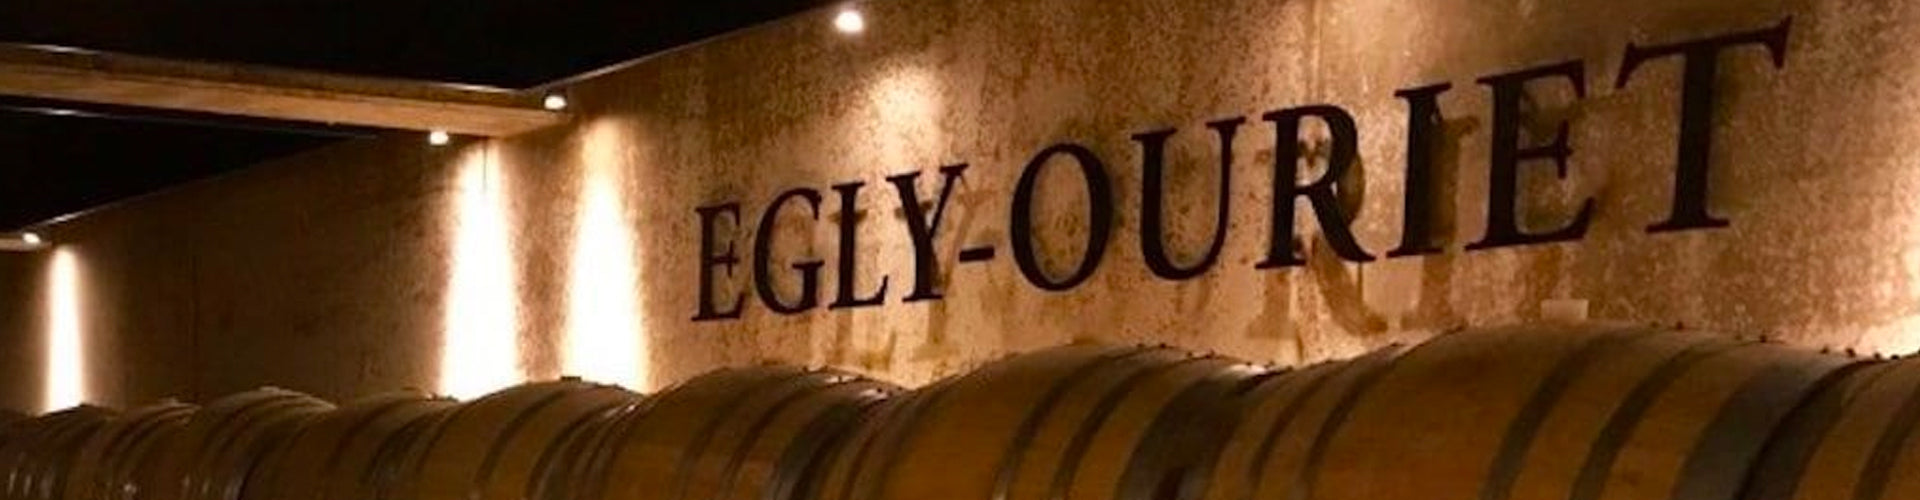 Display Sign in the Champagne cellars of Egly Ouriet